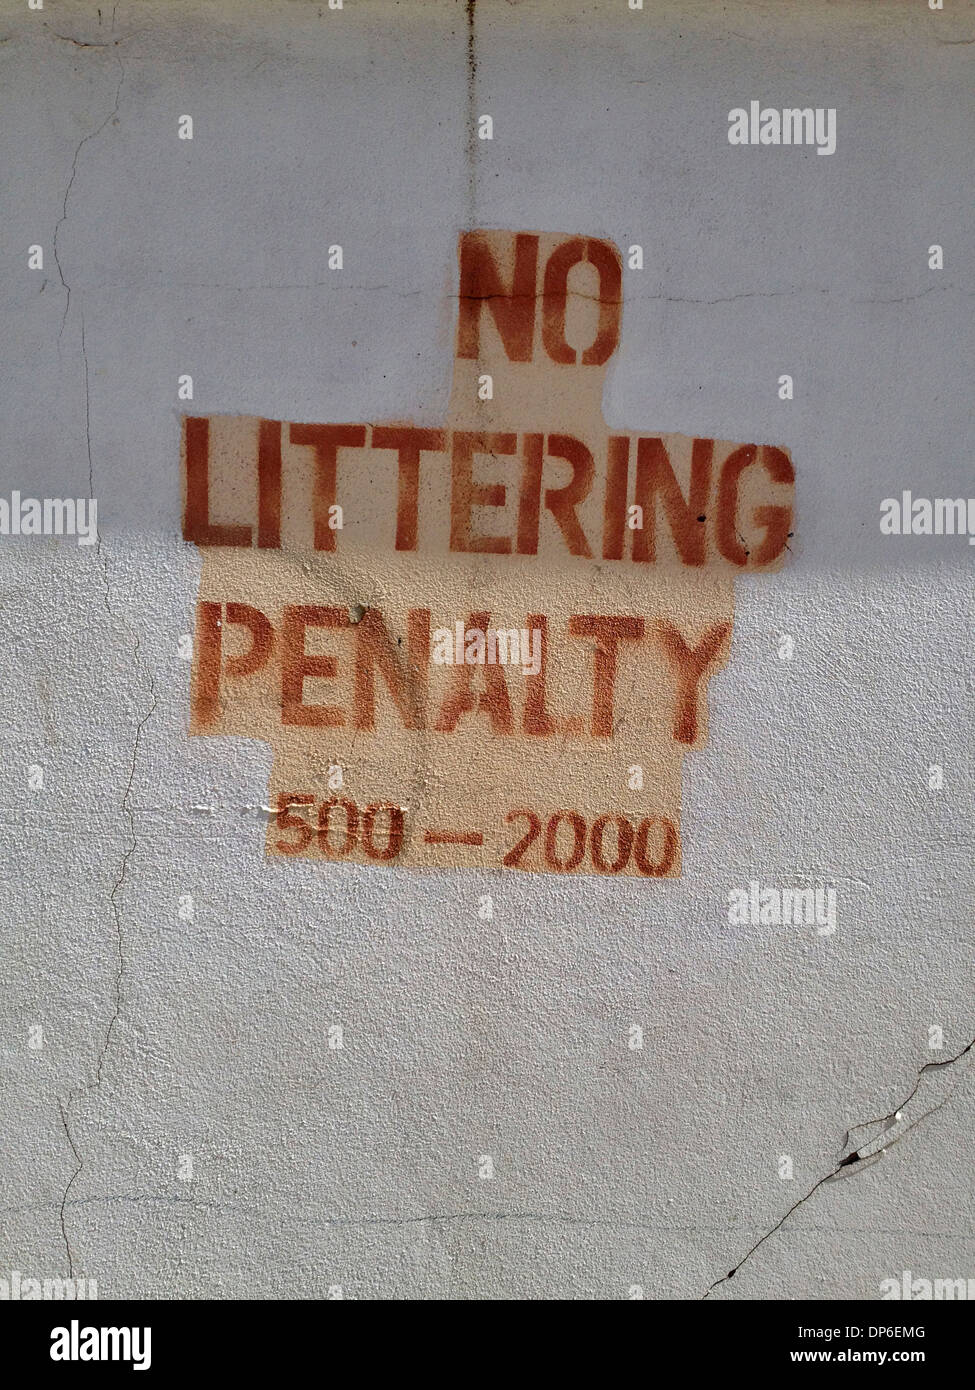 No littering. Penalty. 500-2000 Stock Photo